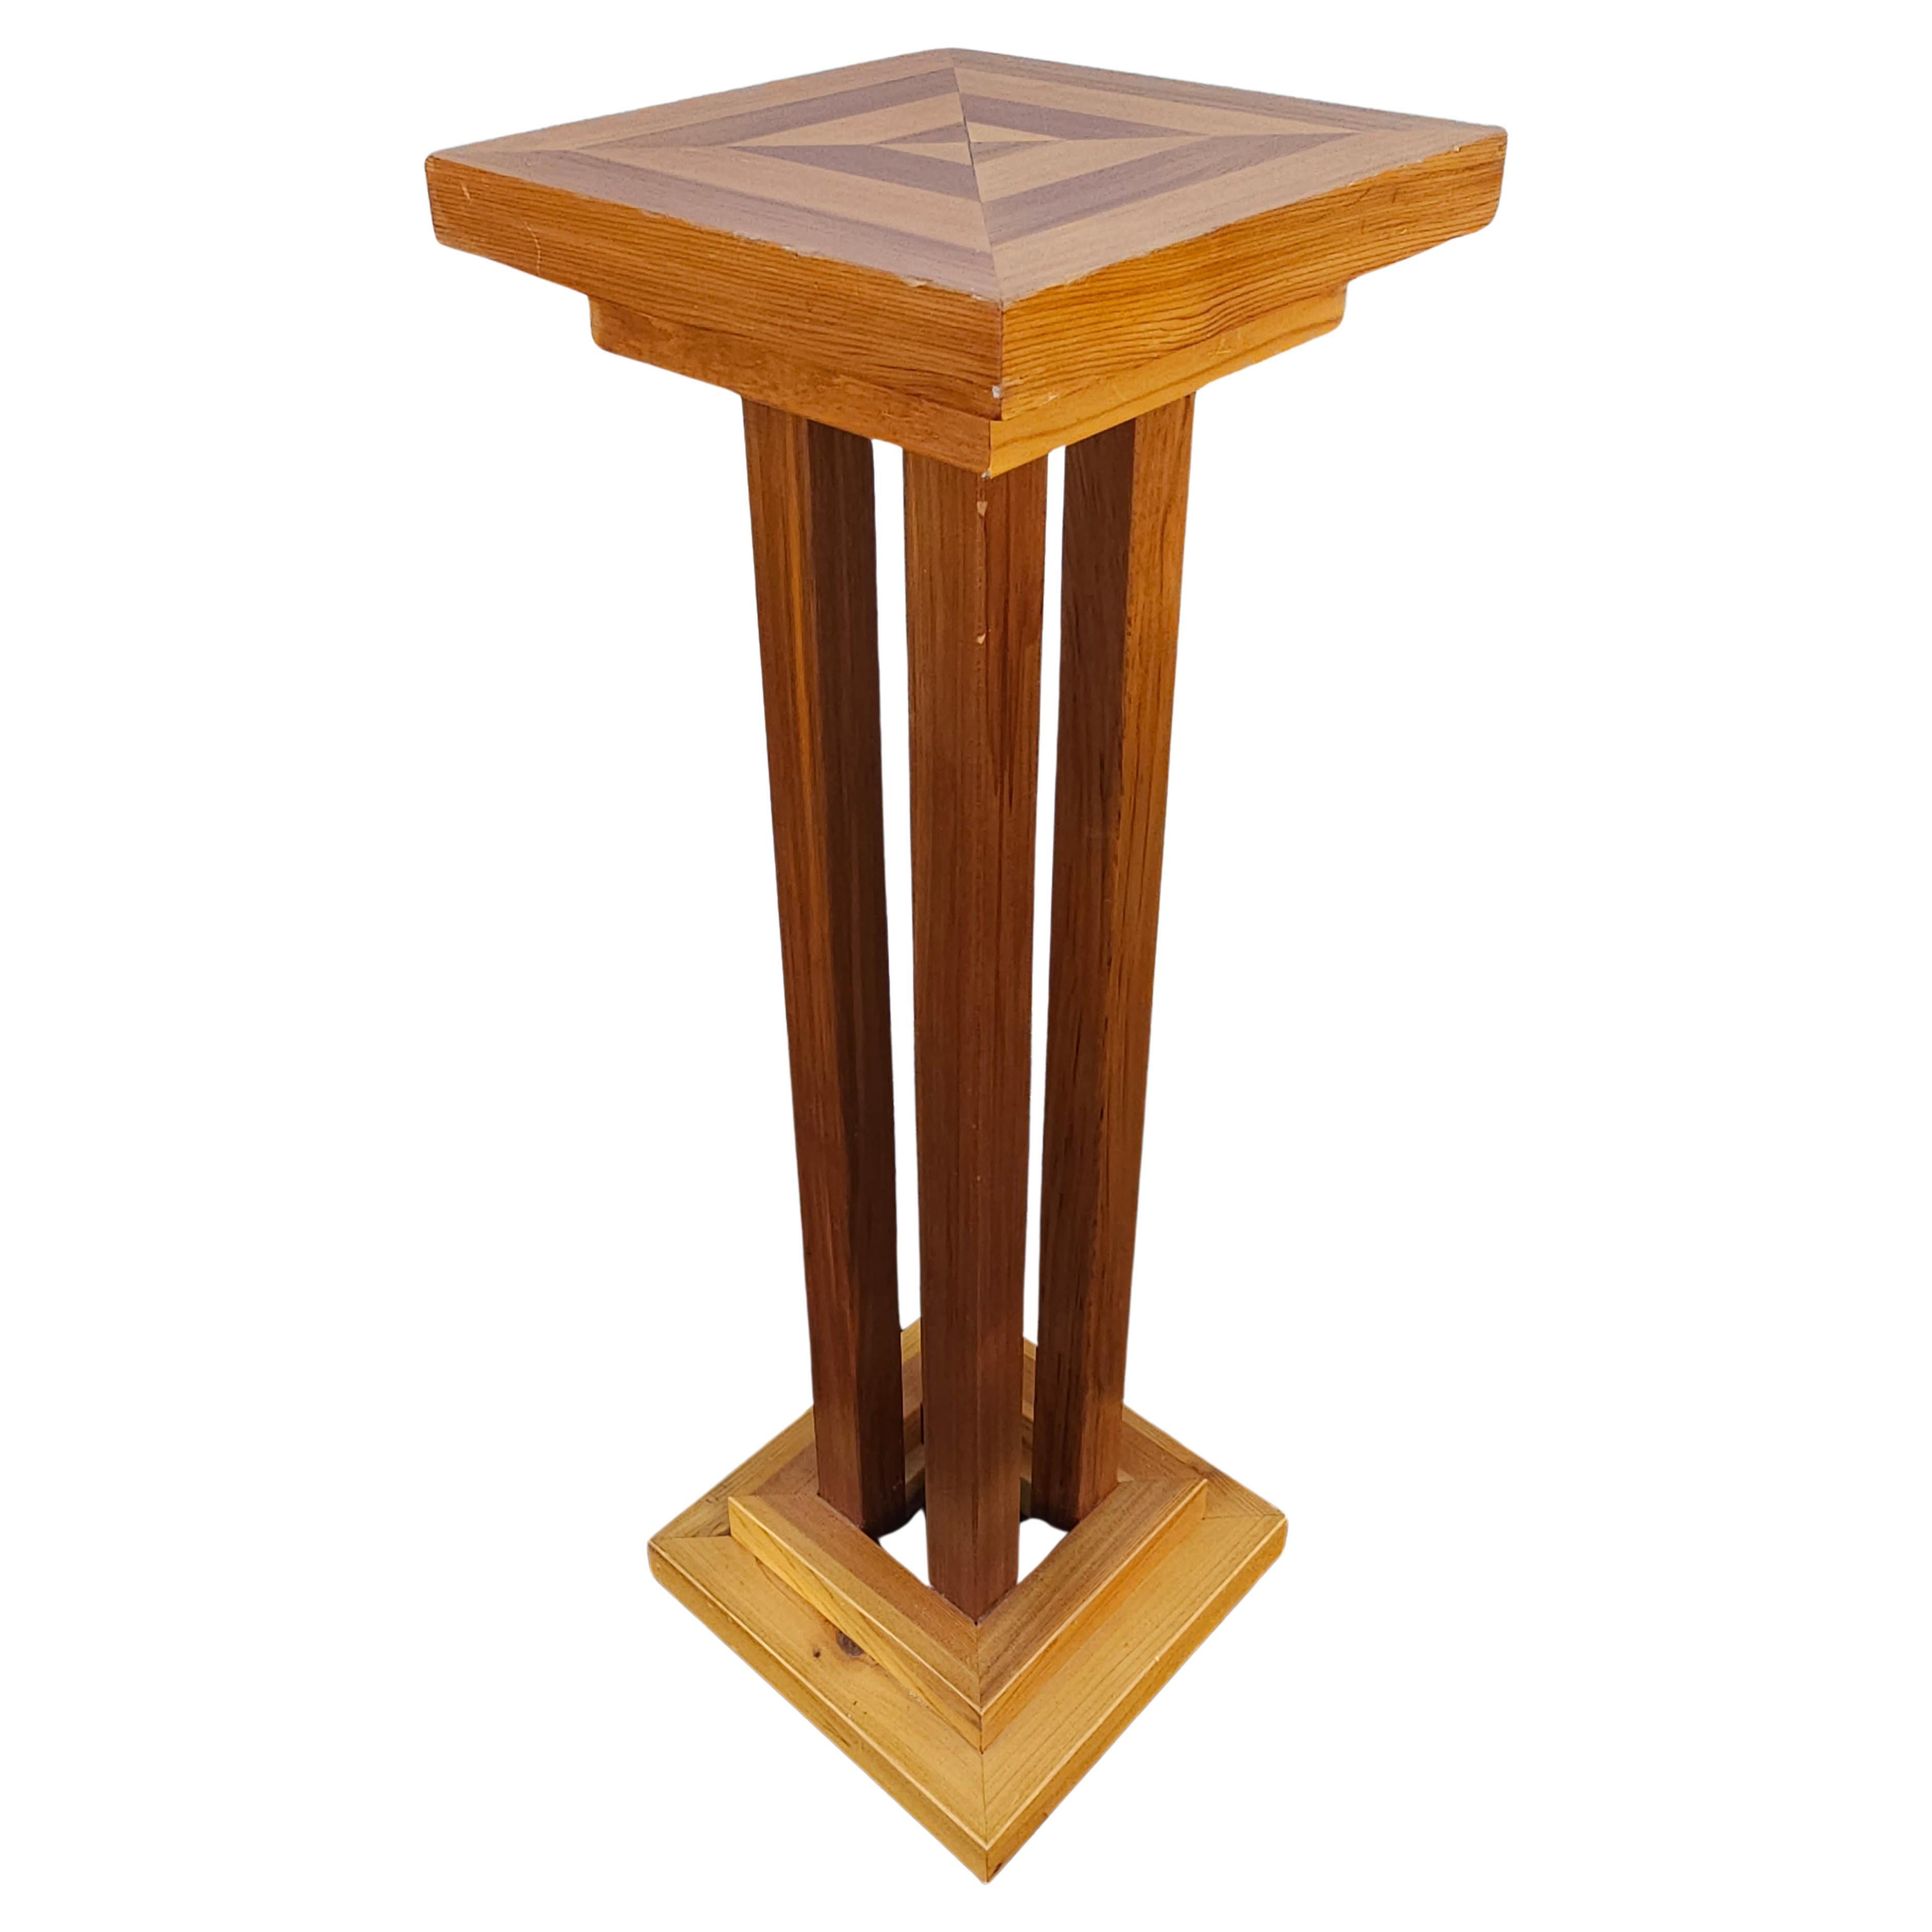 20th Century Mixed Fruitwood Parquetry Pedestal Plant Stand For Sale